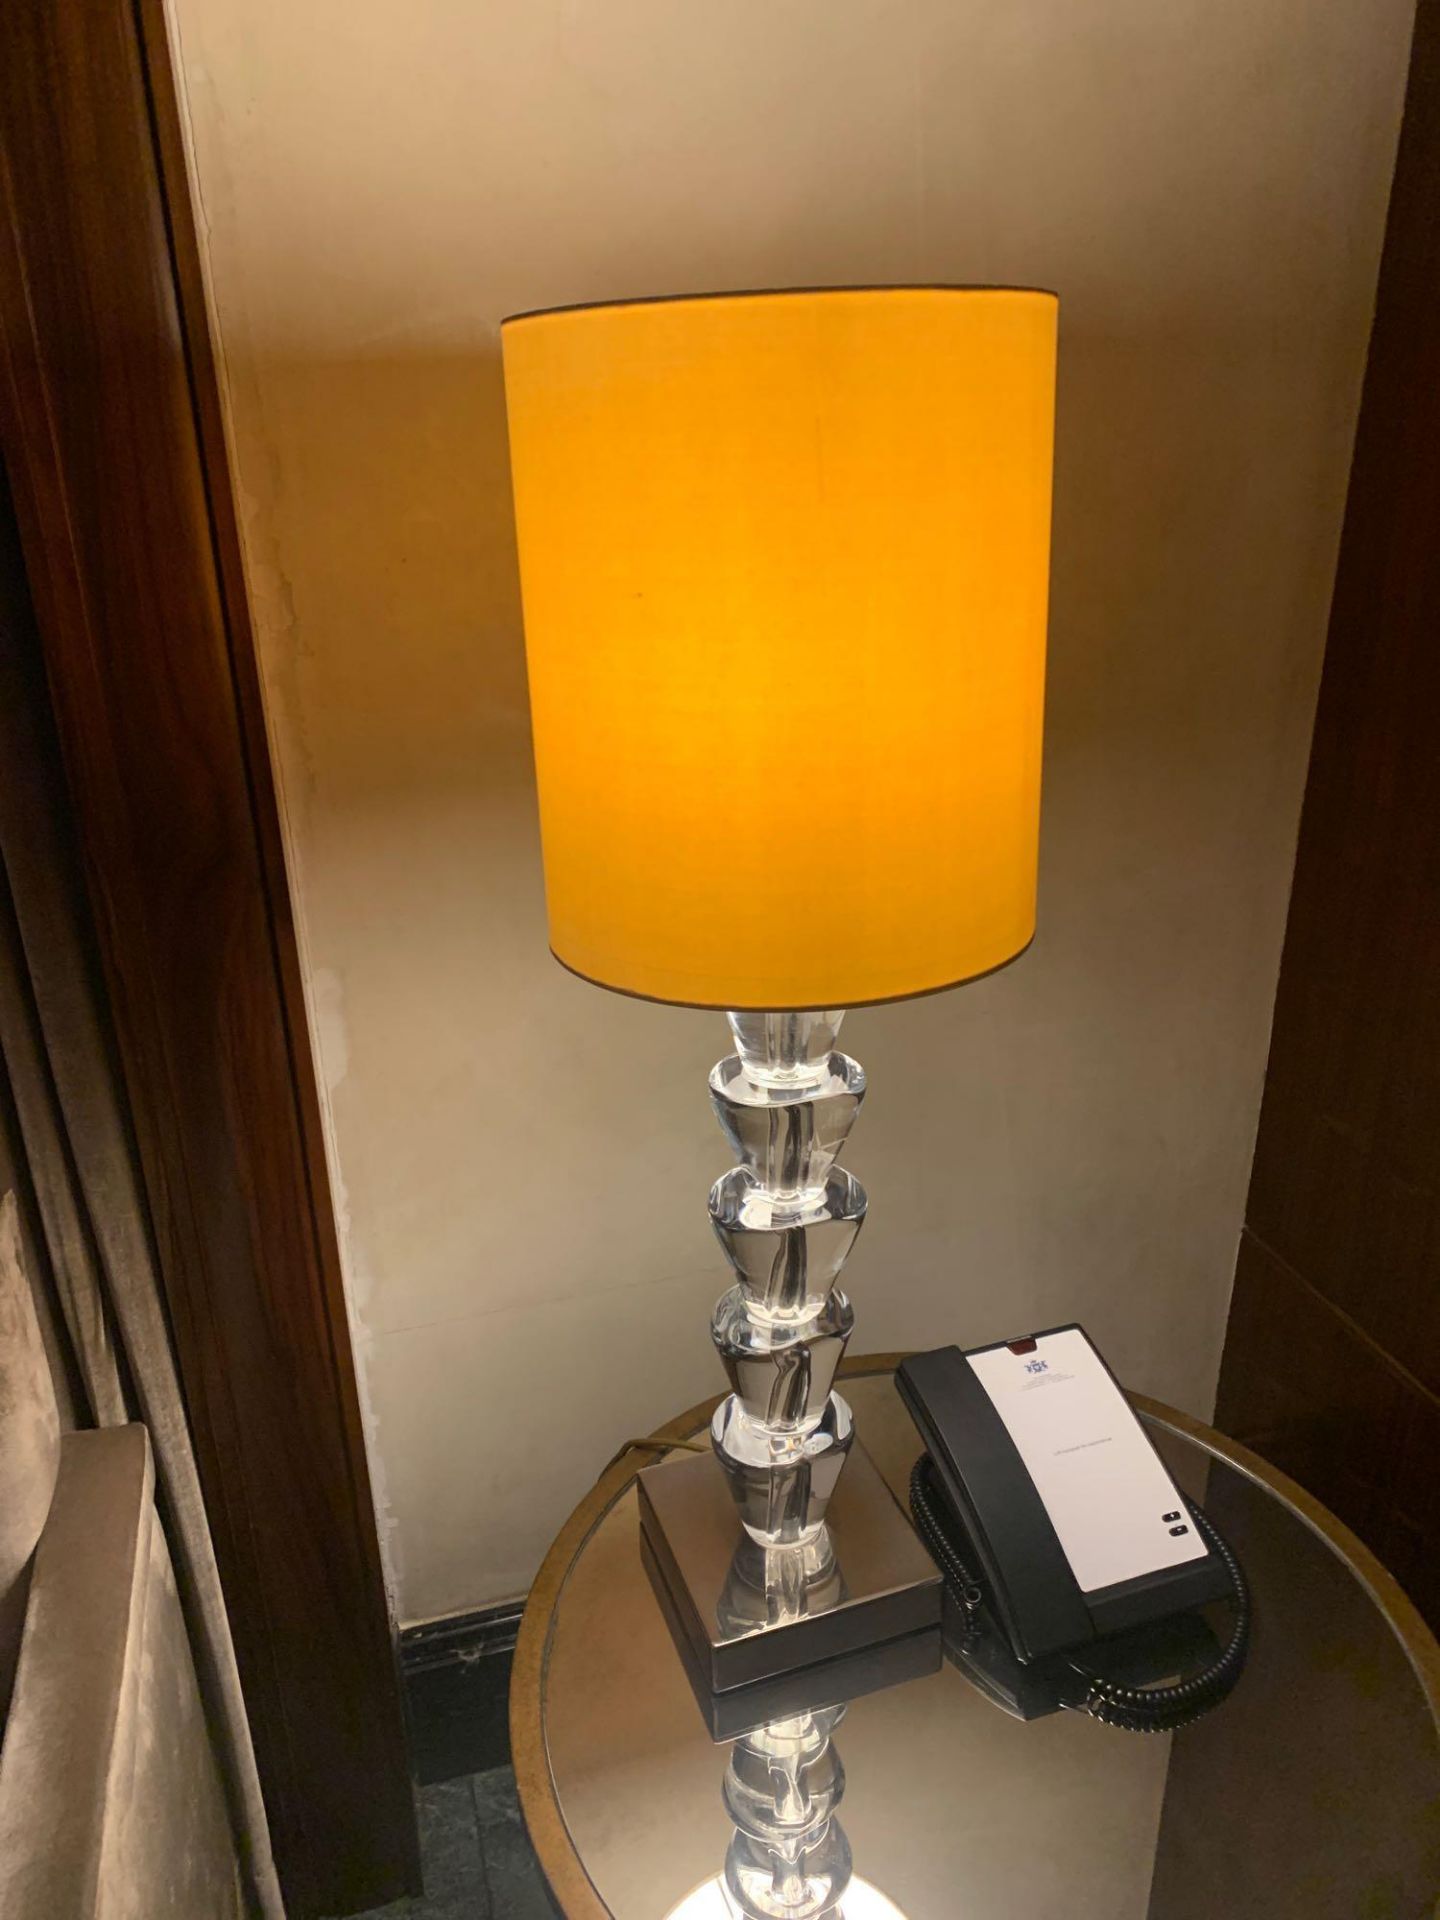 A Pair Of Porta Romana Table Lamps Model GOB/01 Glass Design With Linen Shade And Metal Base 82cm - Image 5 of 5